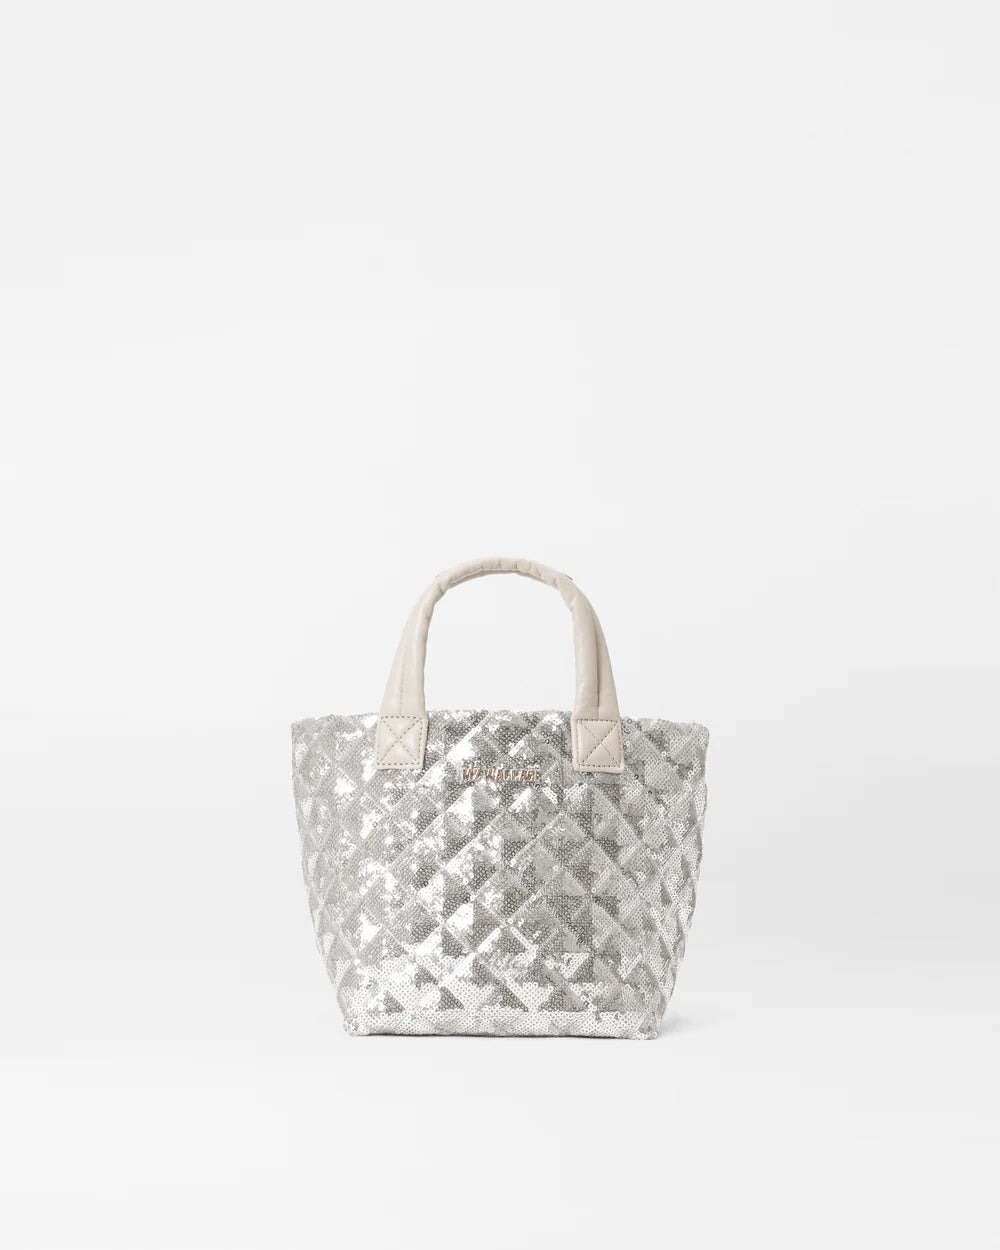 MZ WALLACE MICRO METRO TOTE DELUXE IN ICE SEQUIN